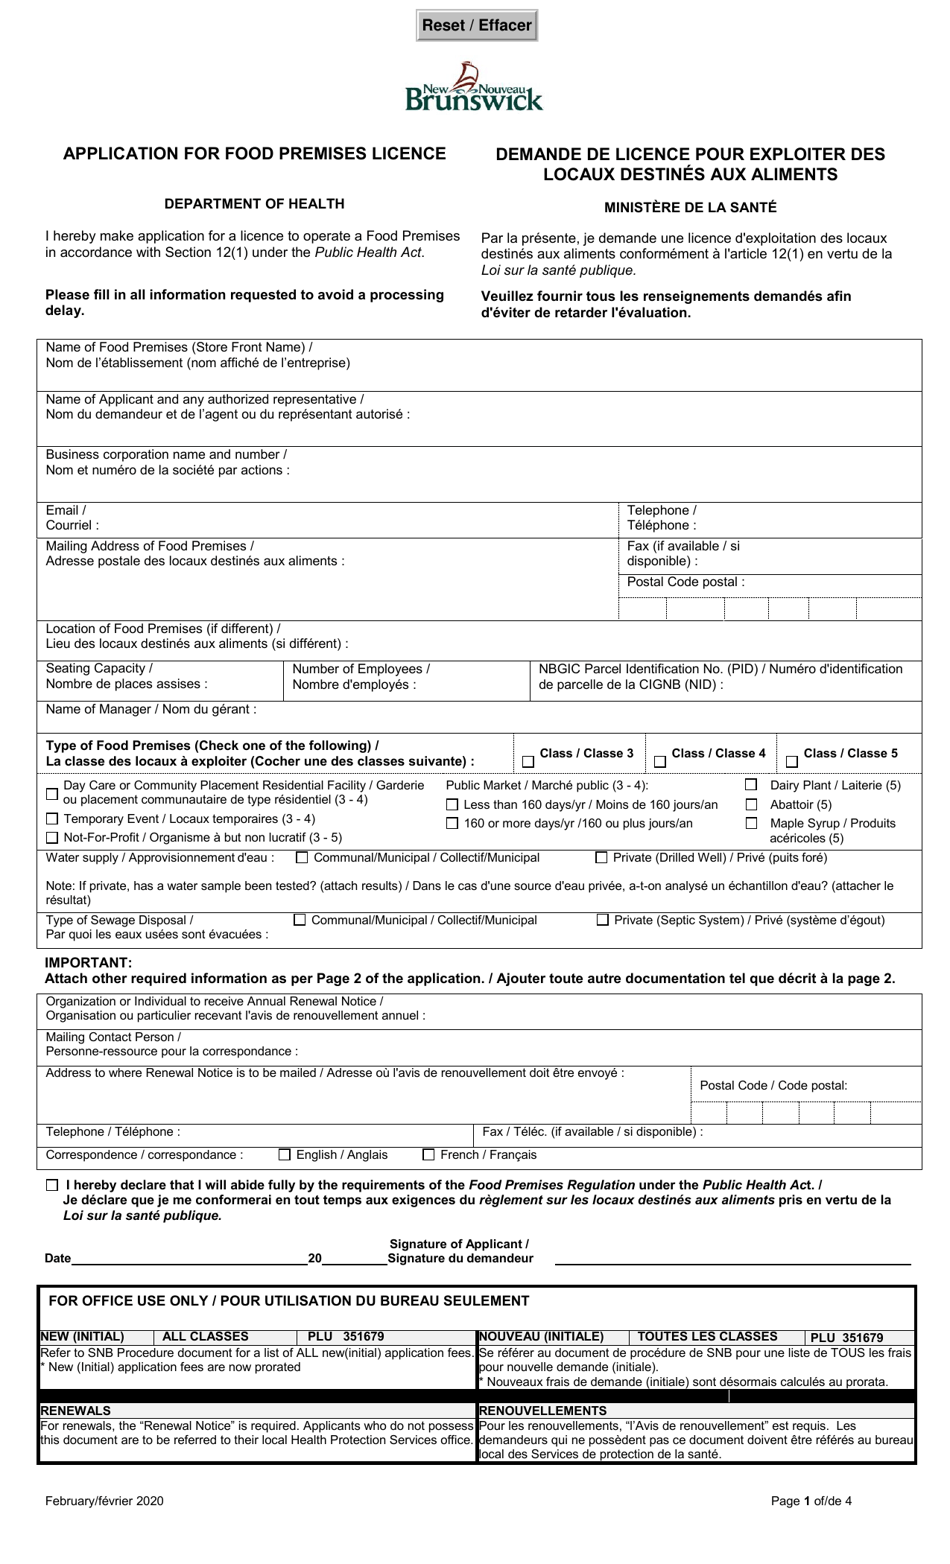 Application for Food Premises Licence - New Brunswick, Canada (English / French), Page 1